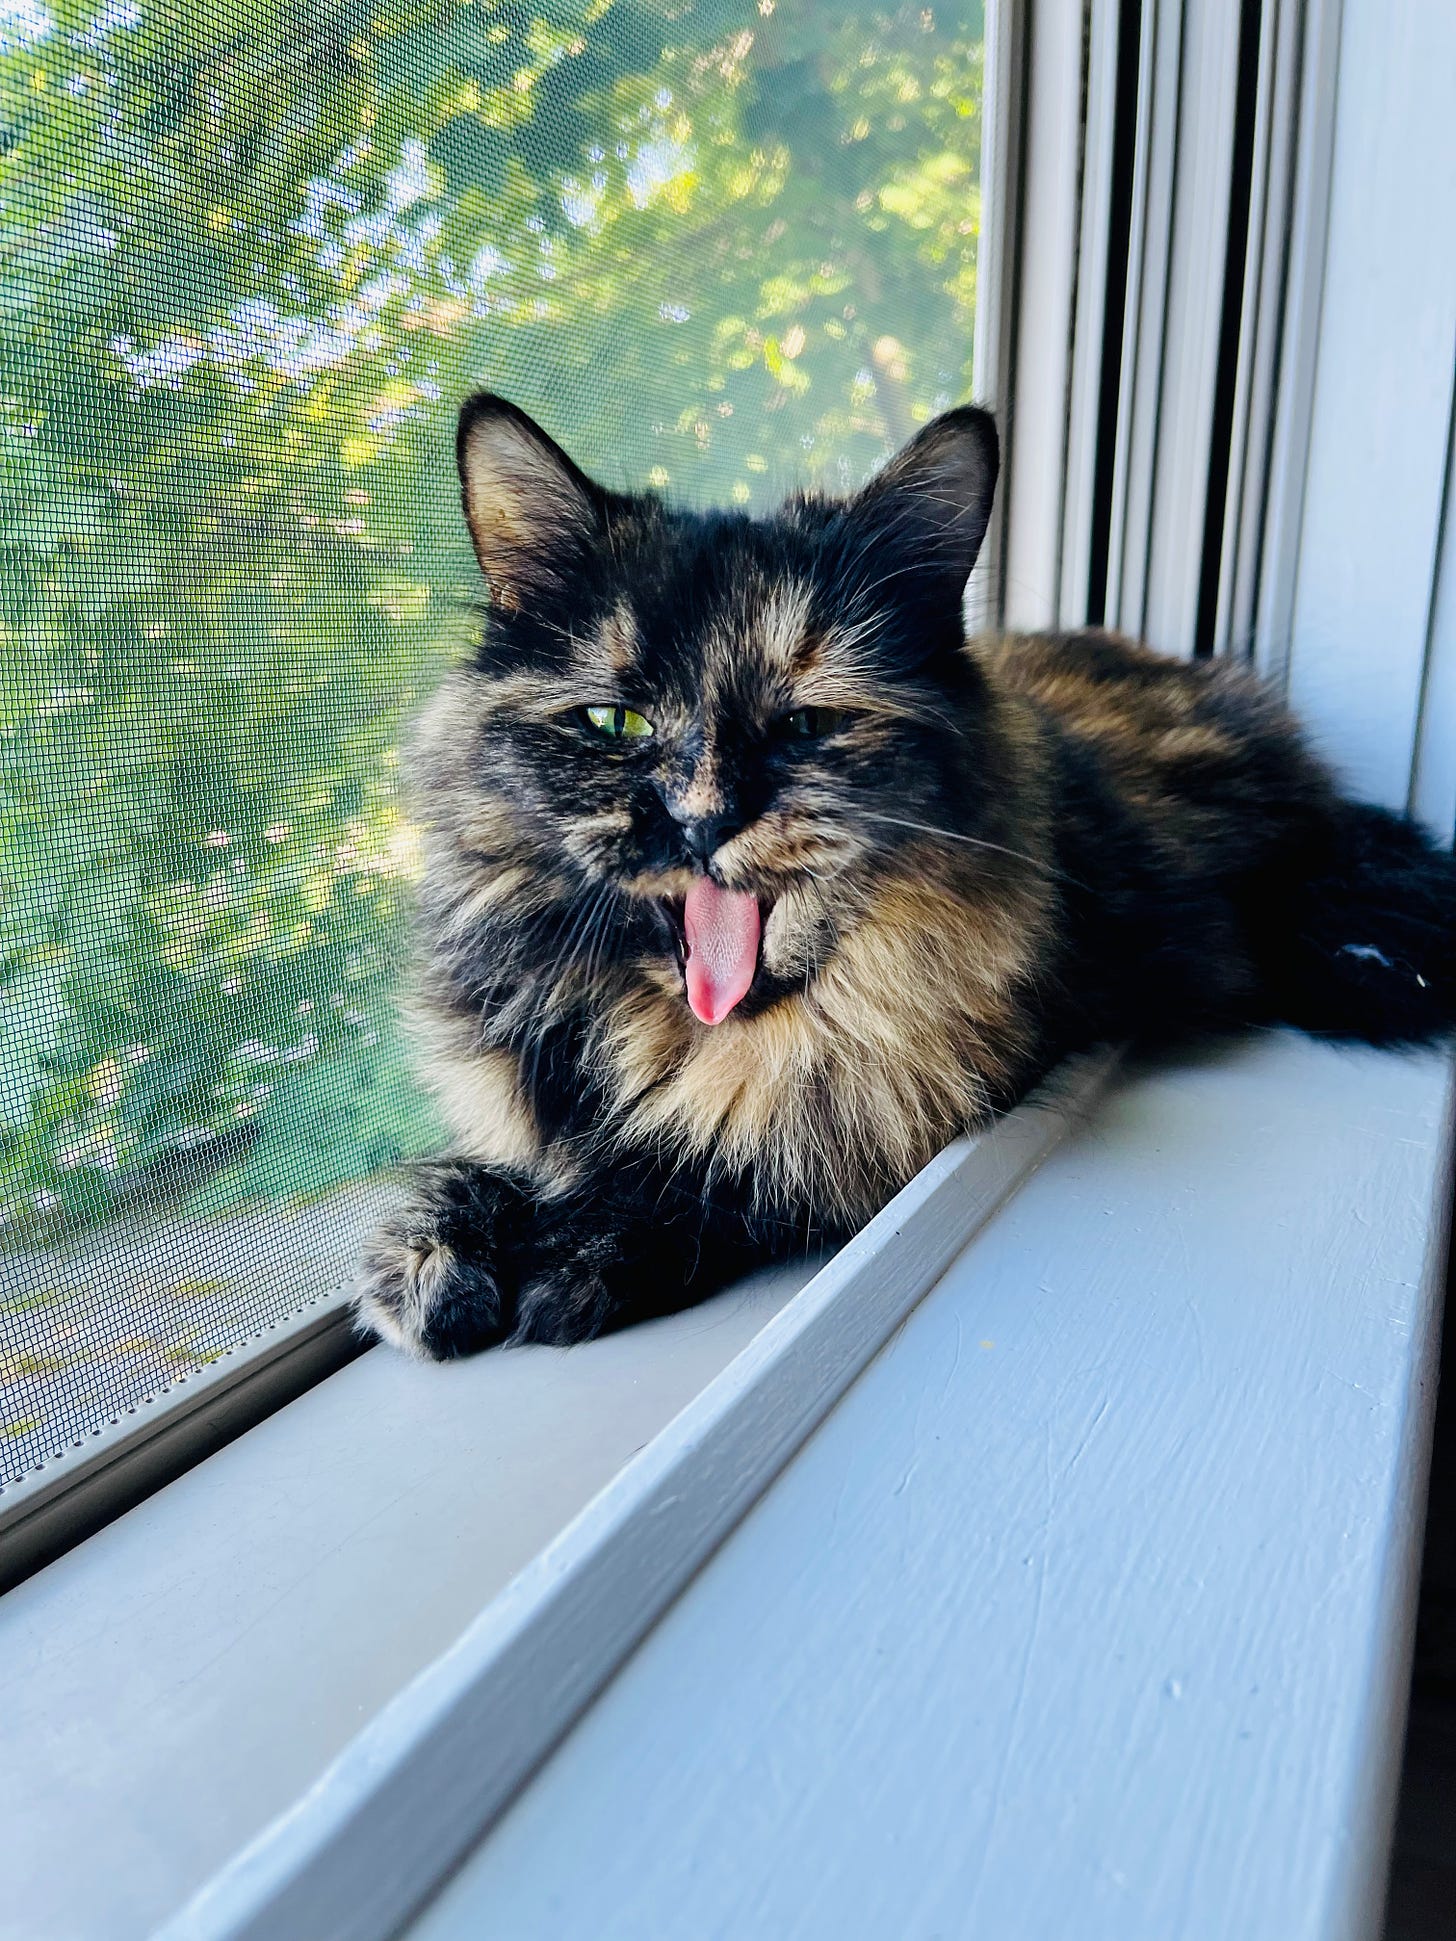 cat in a windowsill with her mouth open, tongue out